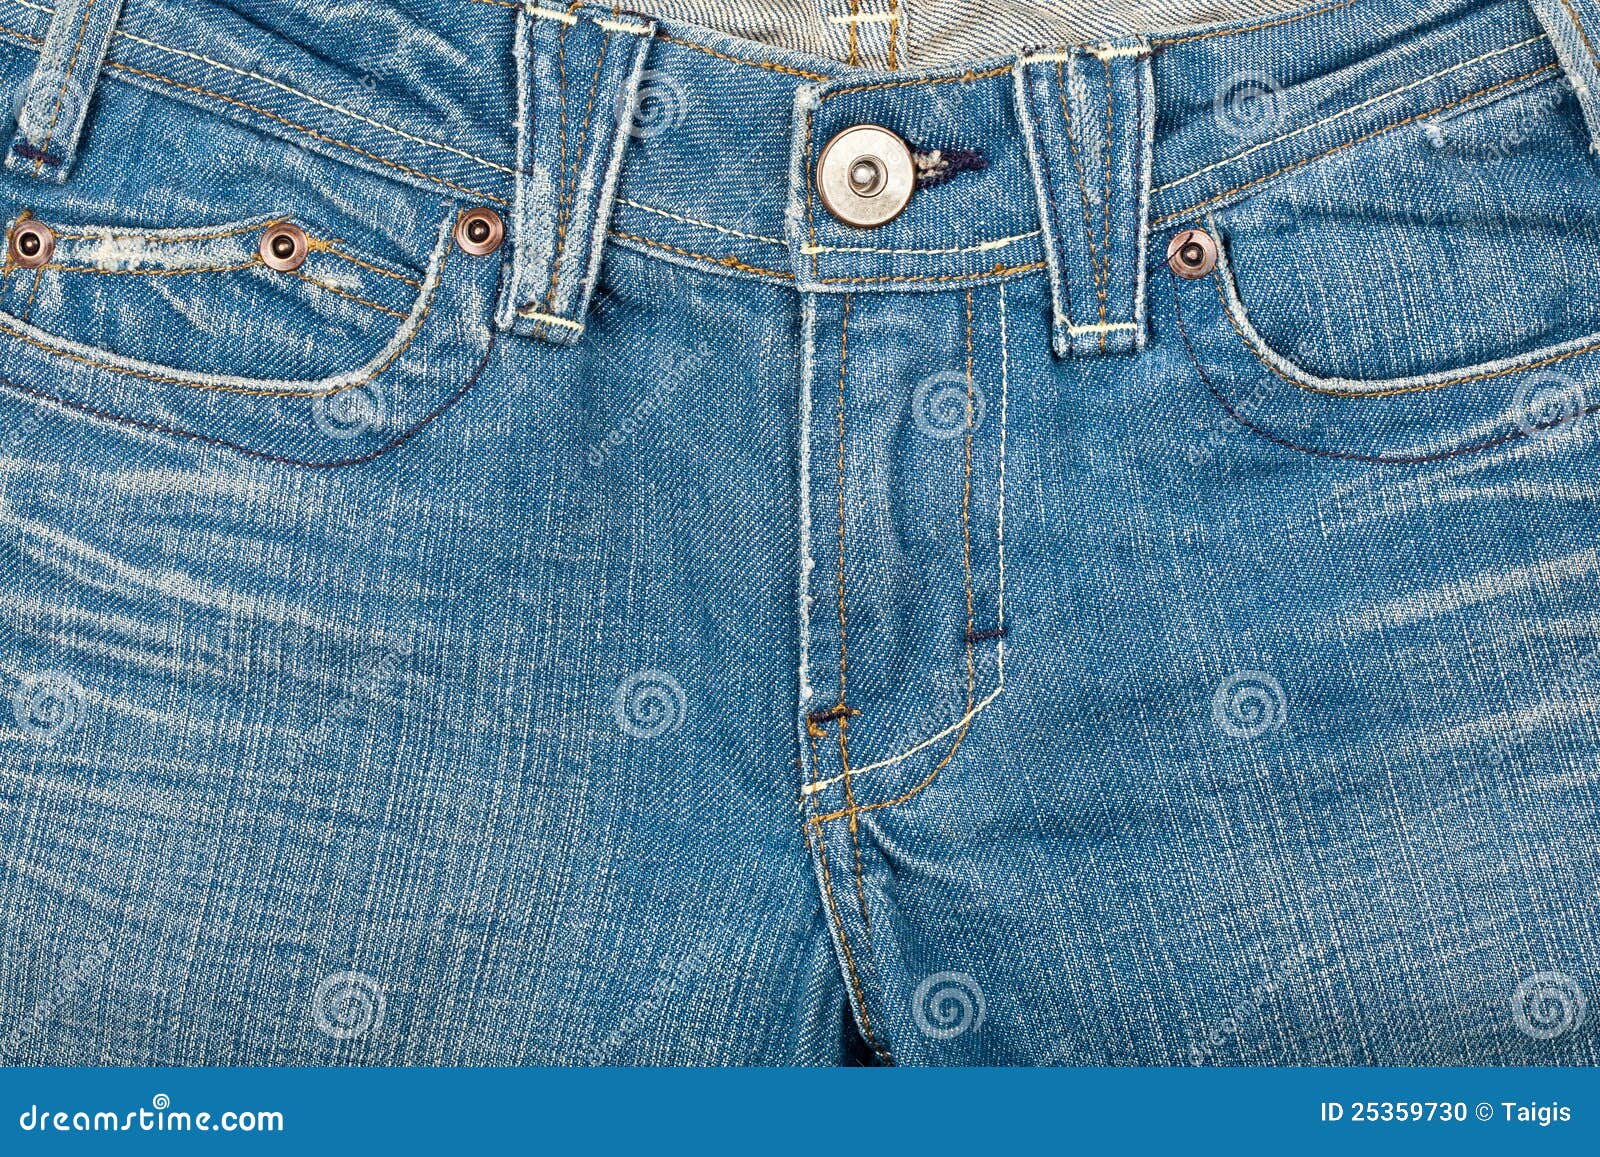 Premature Waist shoes Blue jeans front stock photo. Image of cloth, pattern - 25359730